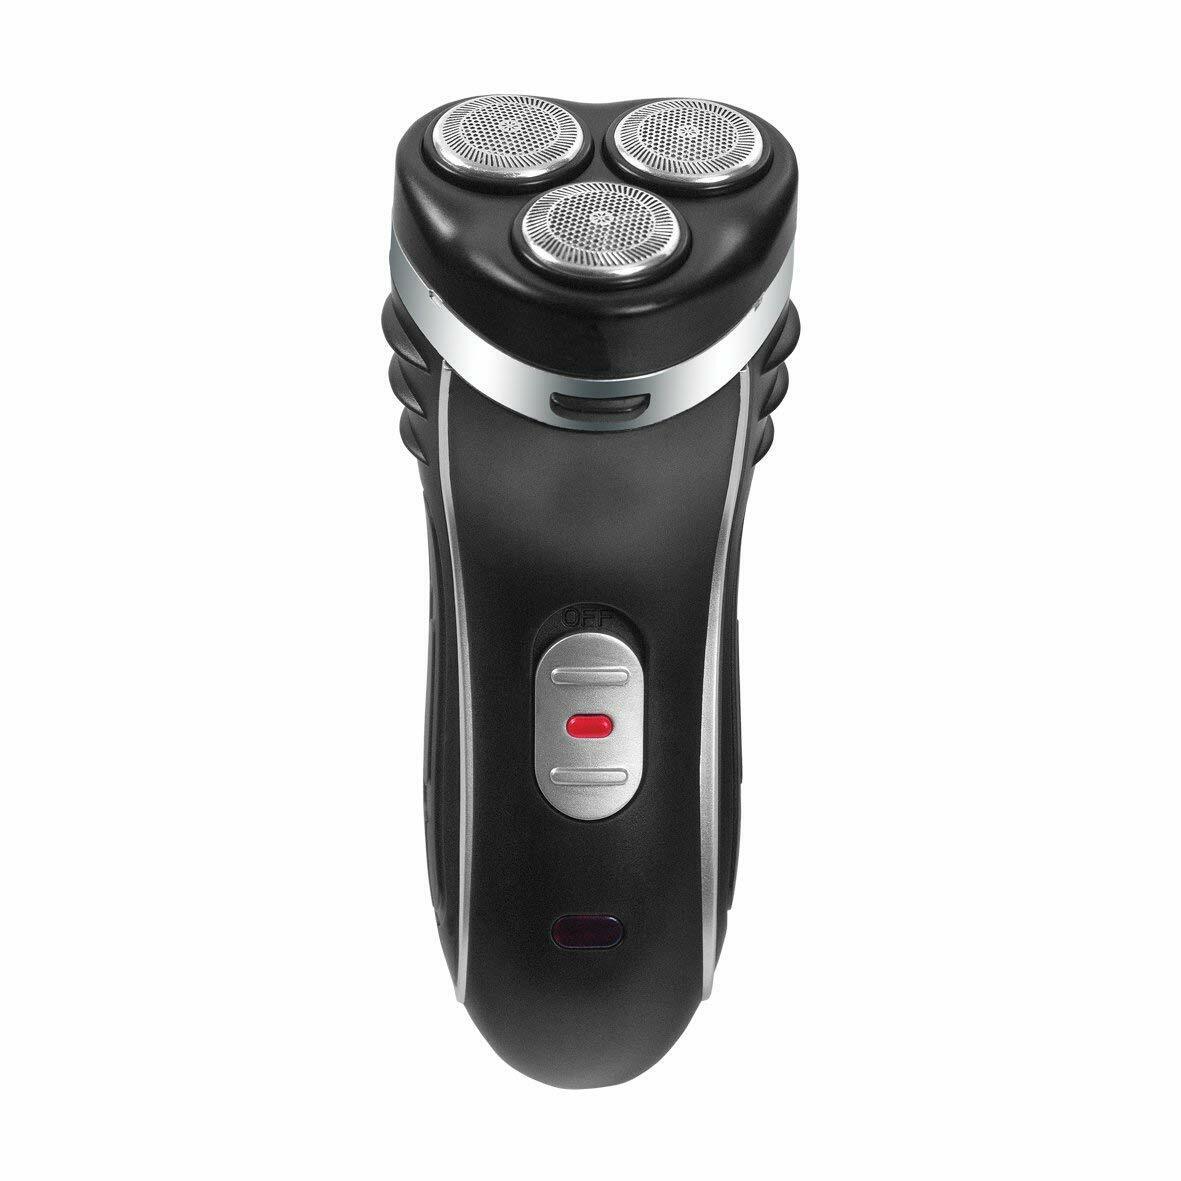 BAUER Cordless Electric Shaver with Trimmer